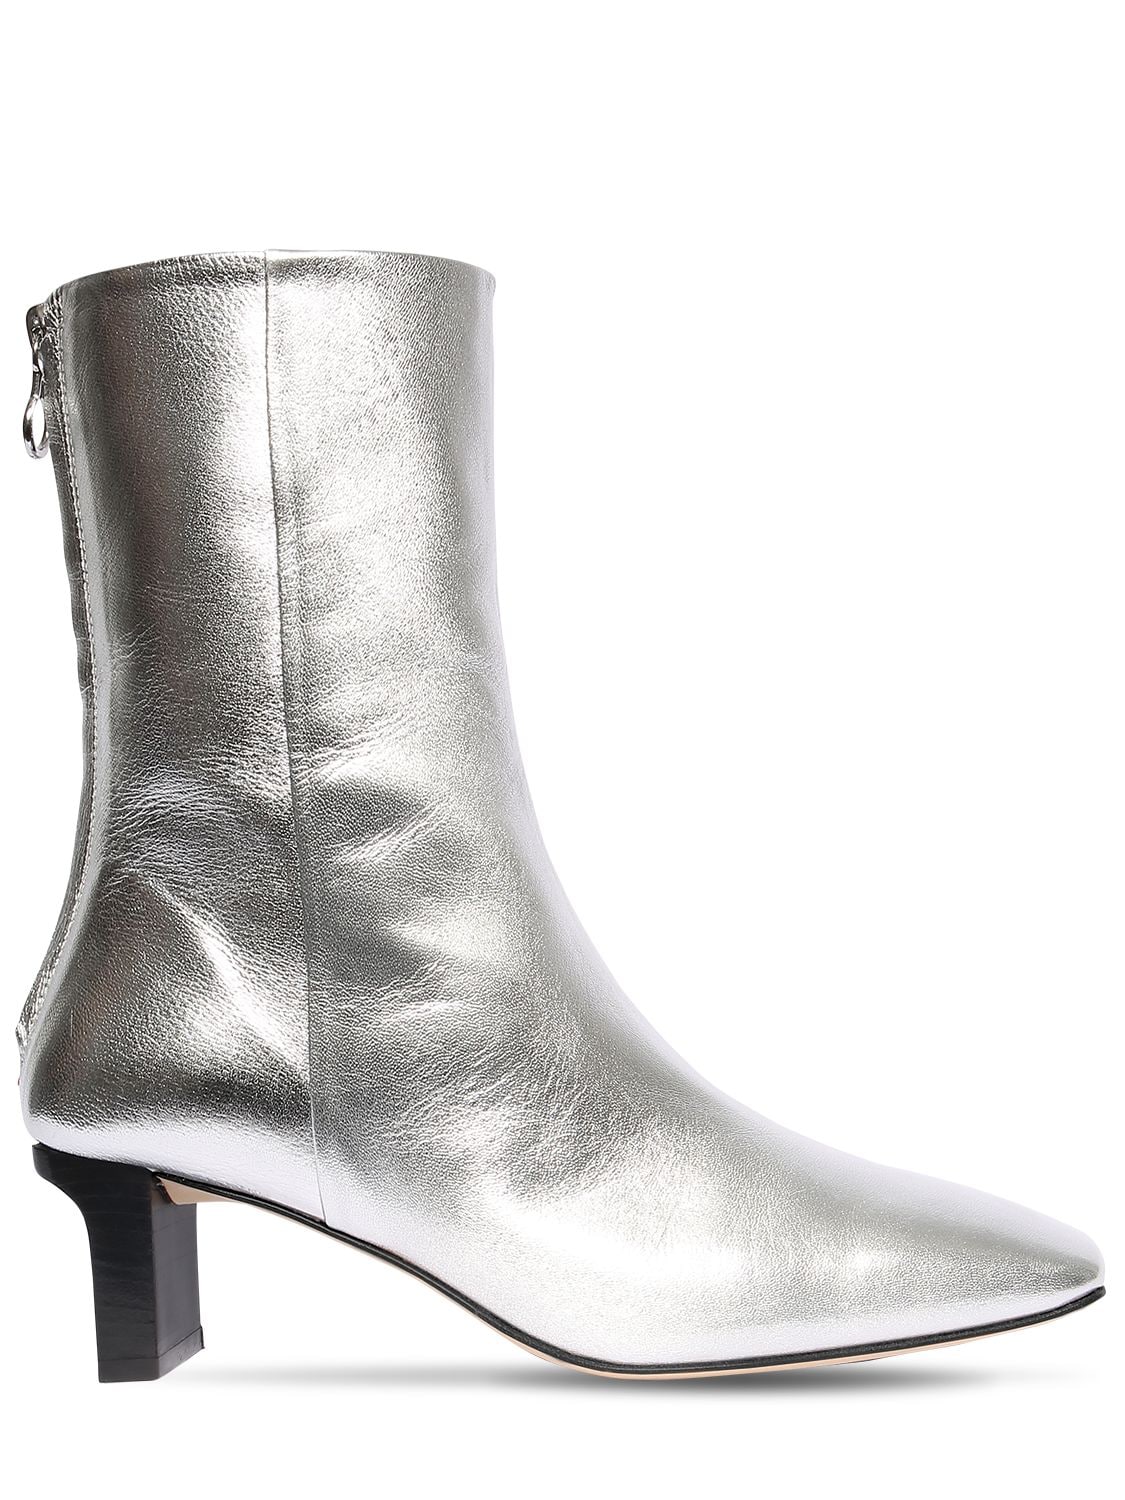 55mm Tilly Metallic Leather Ankle Boots